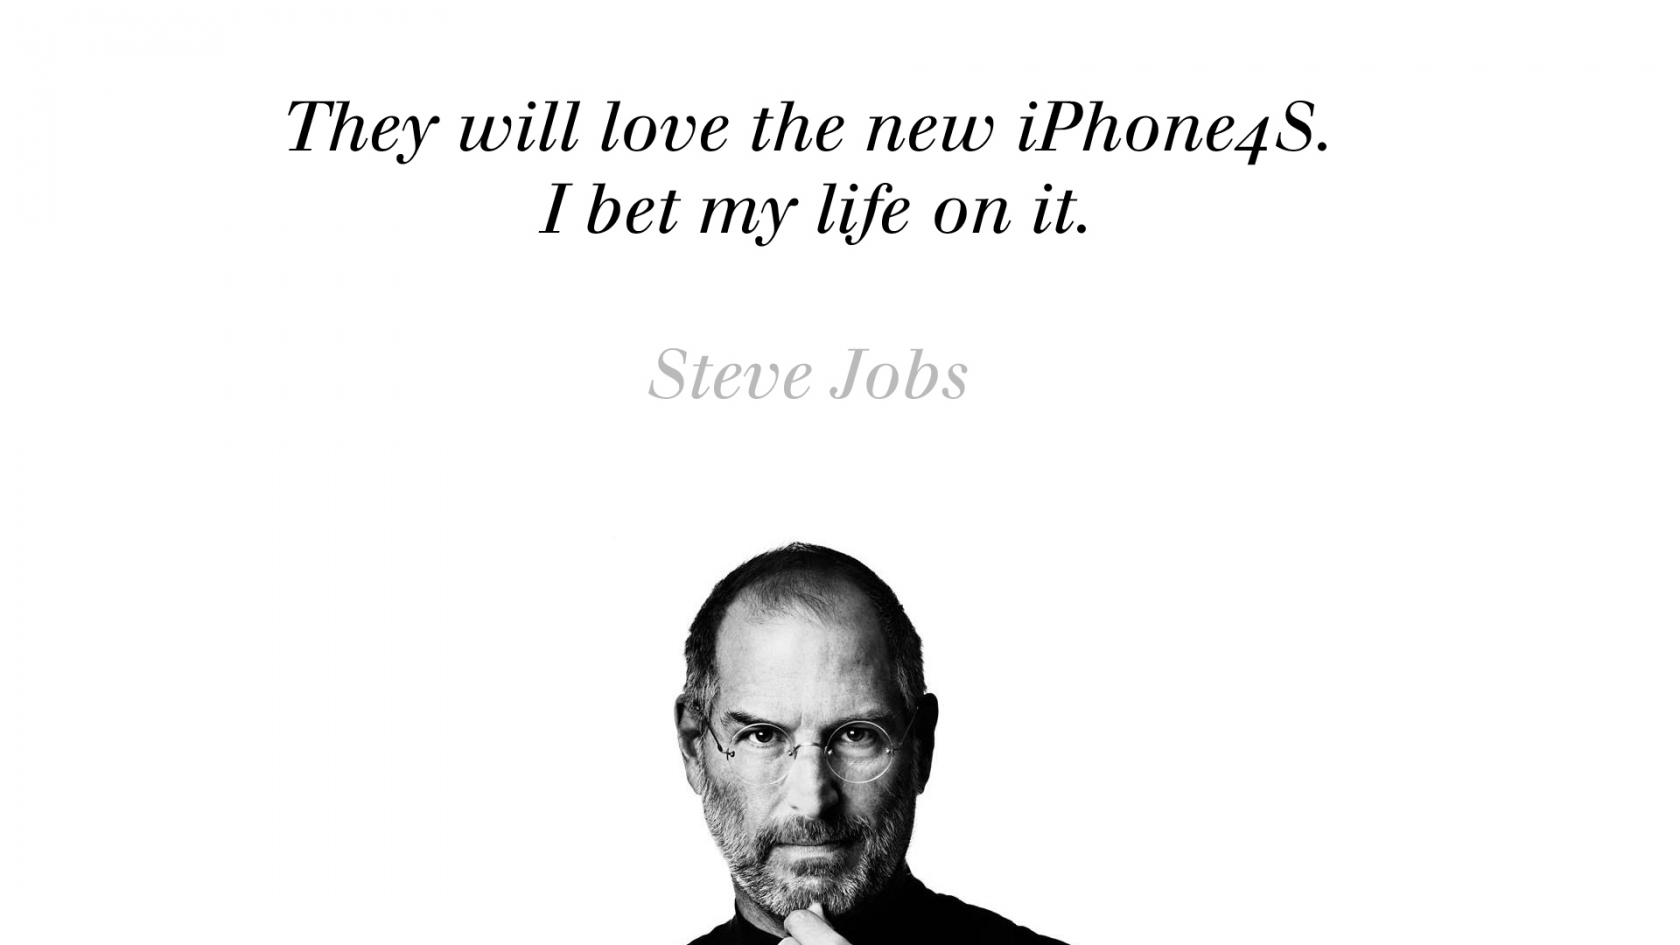 Steve Jobs about iPhone 4S for 1680 x 945 HDTV resolution